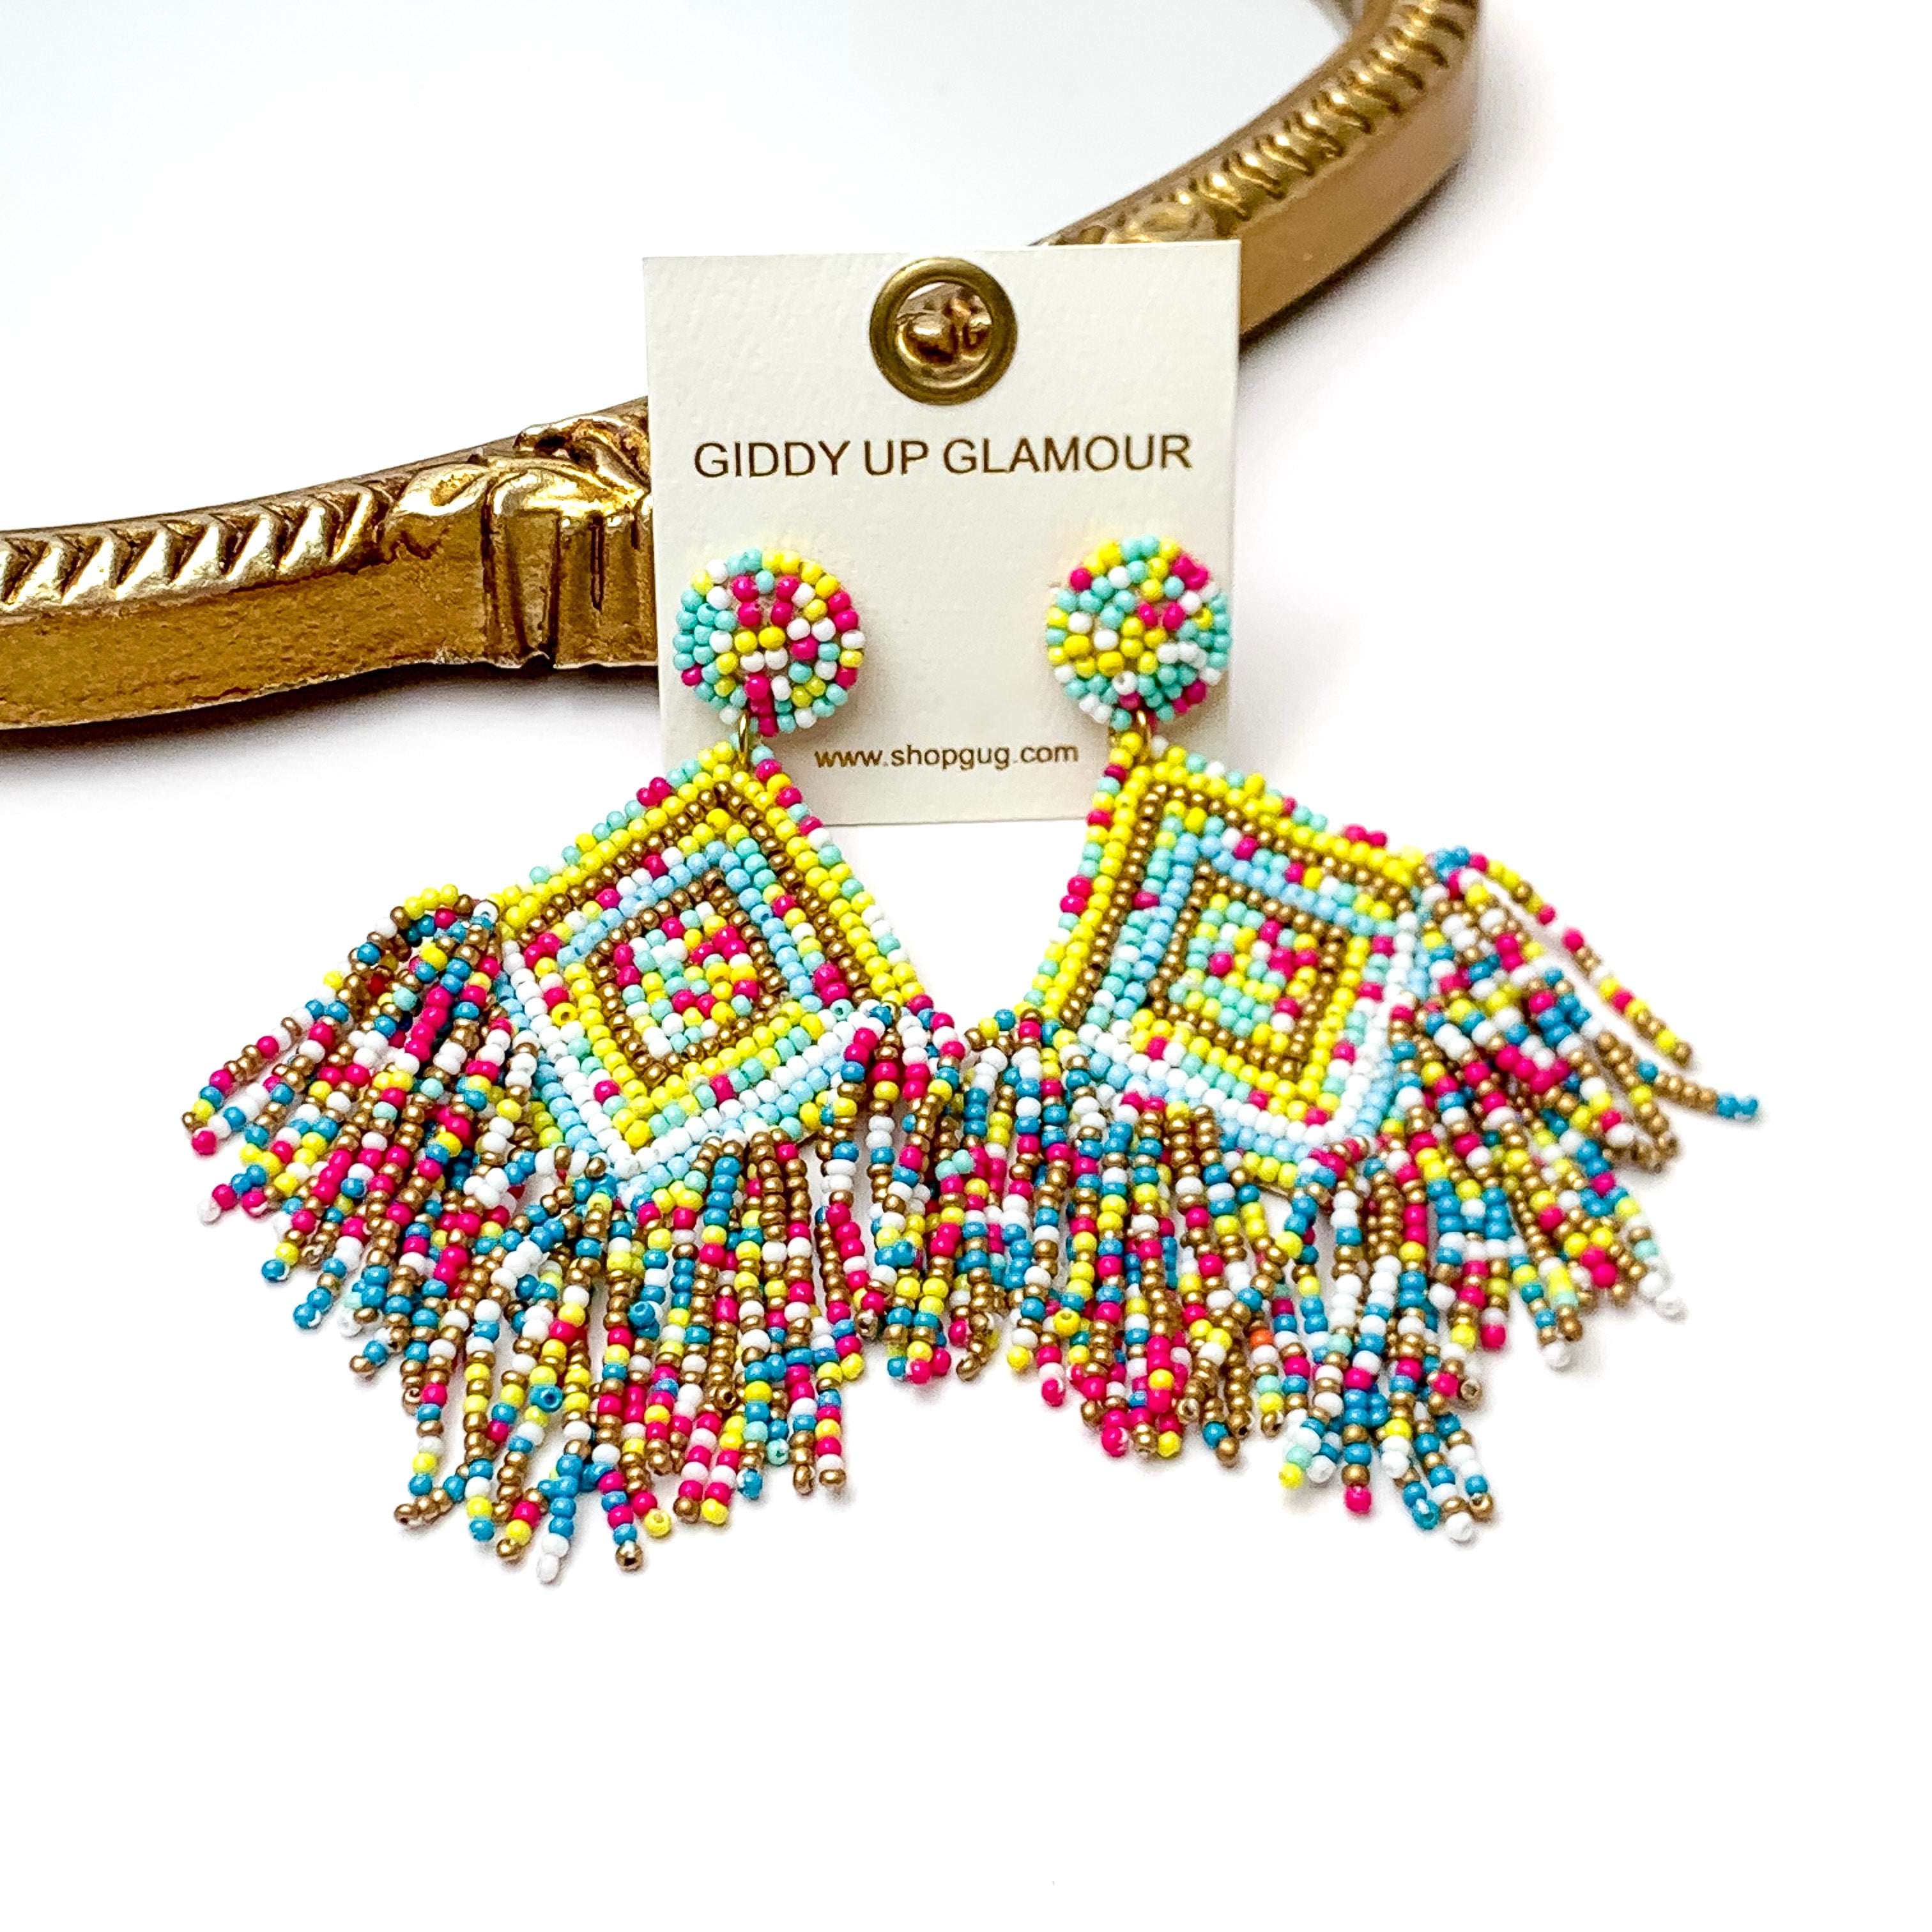 Diamond Shaped Seed Bead Earrings with Seed Bead Tassel Fringe in Multicolor - Giddy Up Glamour Boutique